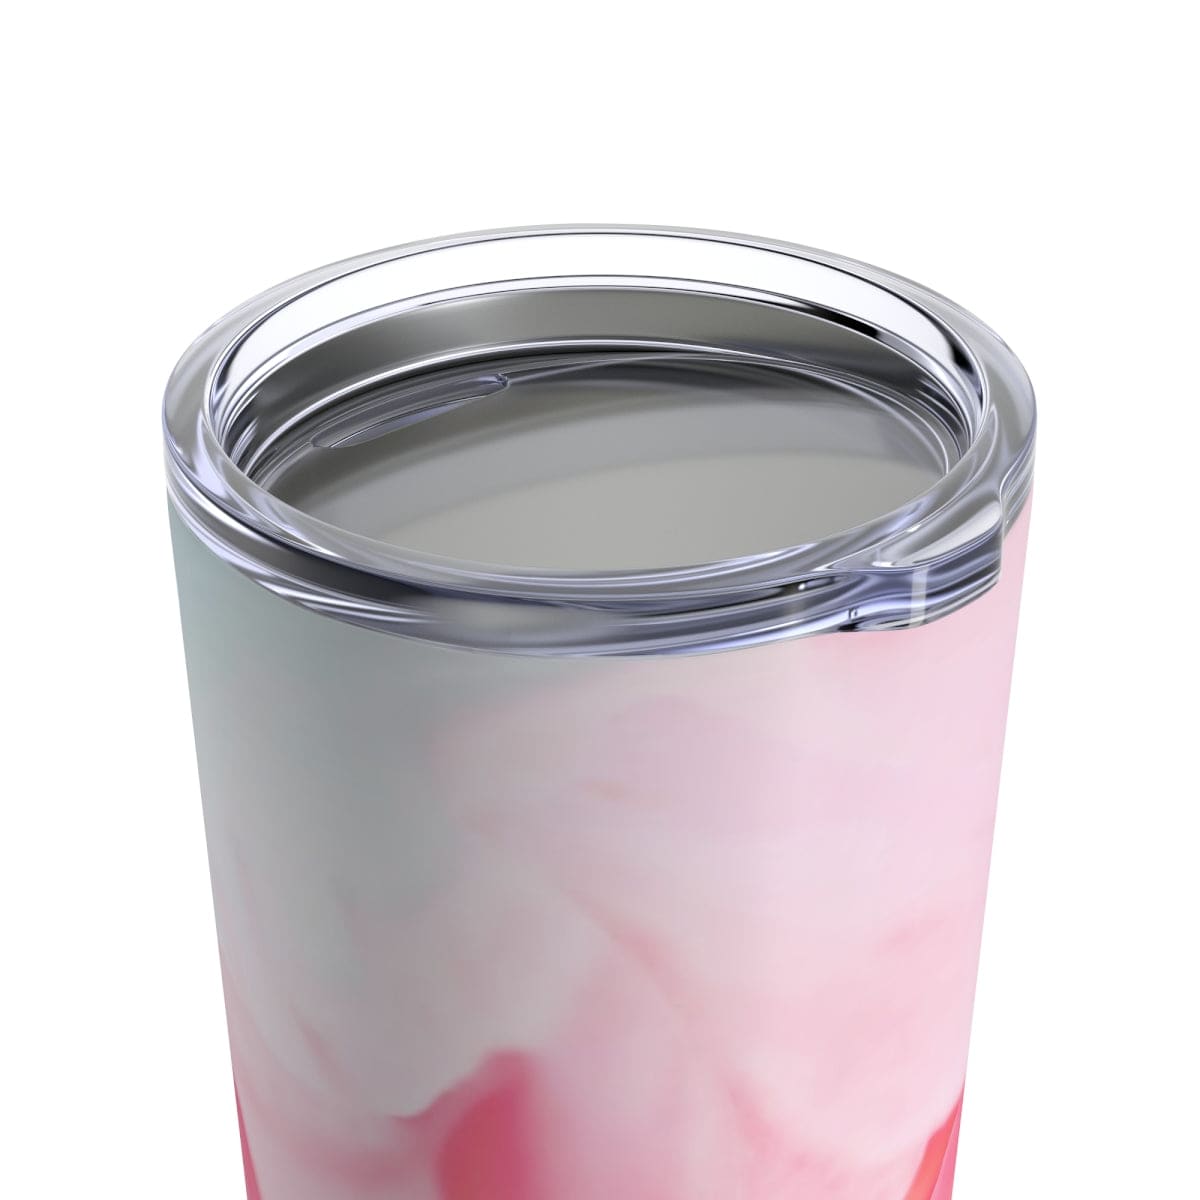 Insulated Tumbler 20oz Pink Flower Bloom Peaceful Spring Nature - Decorative